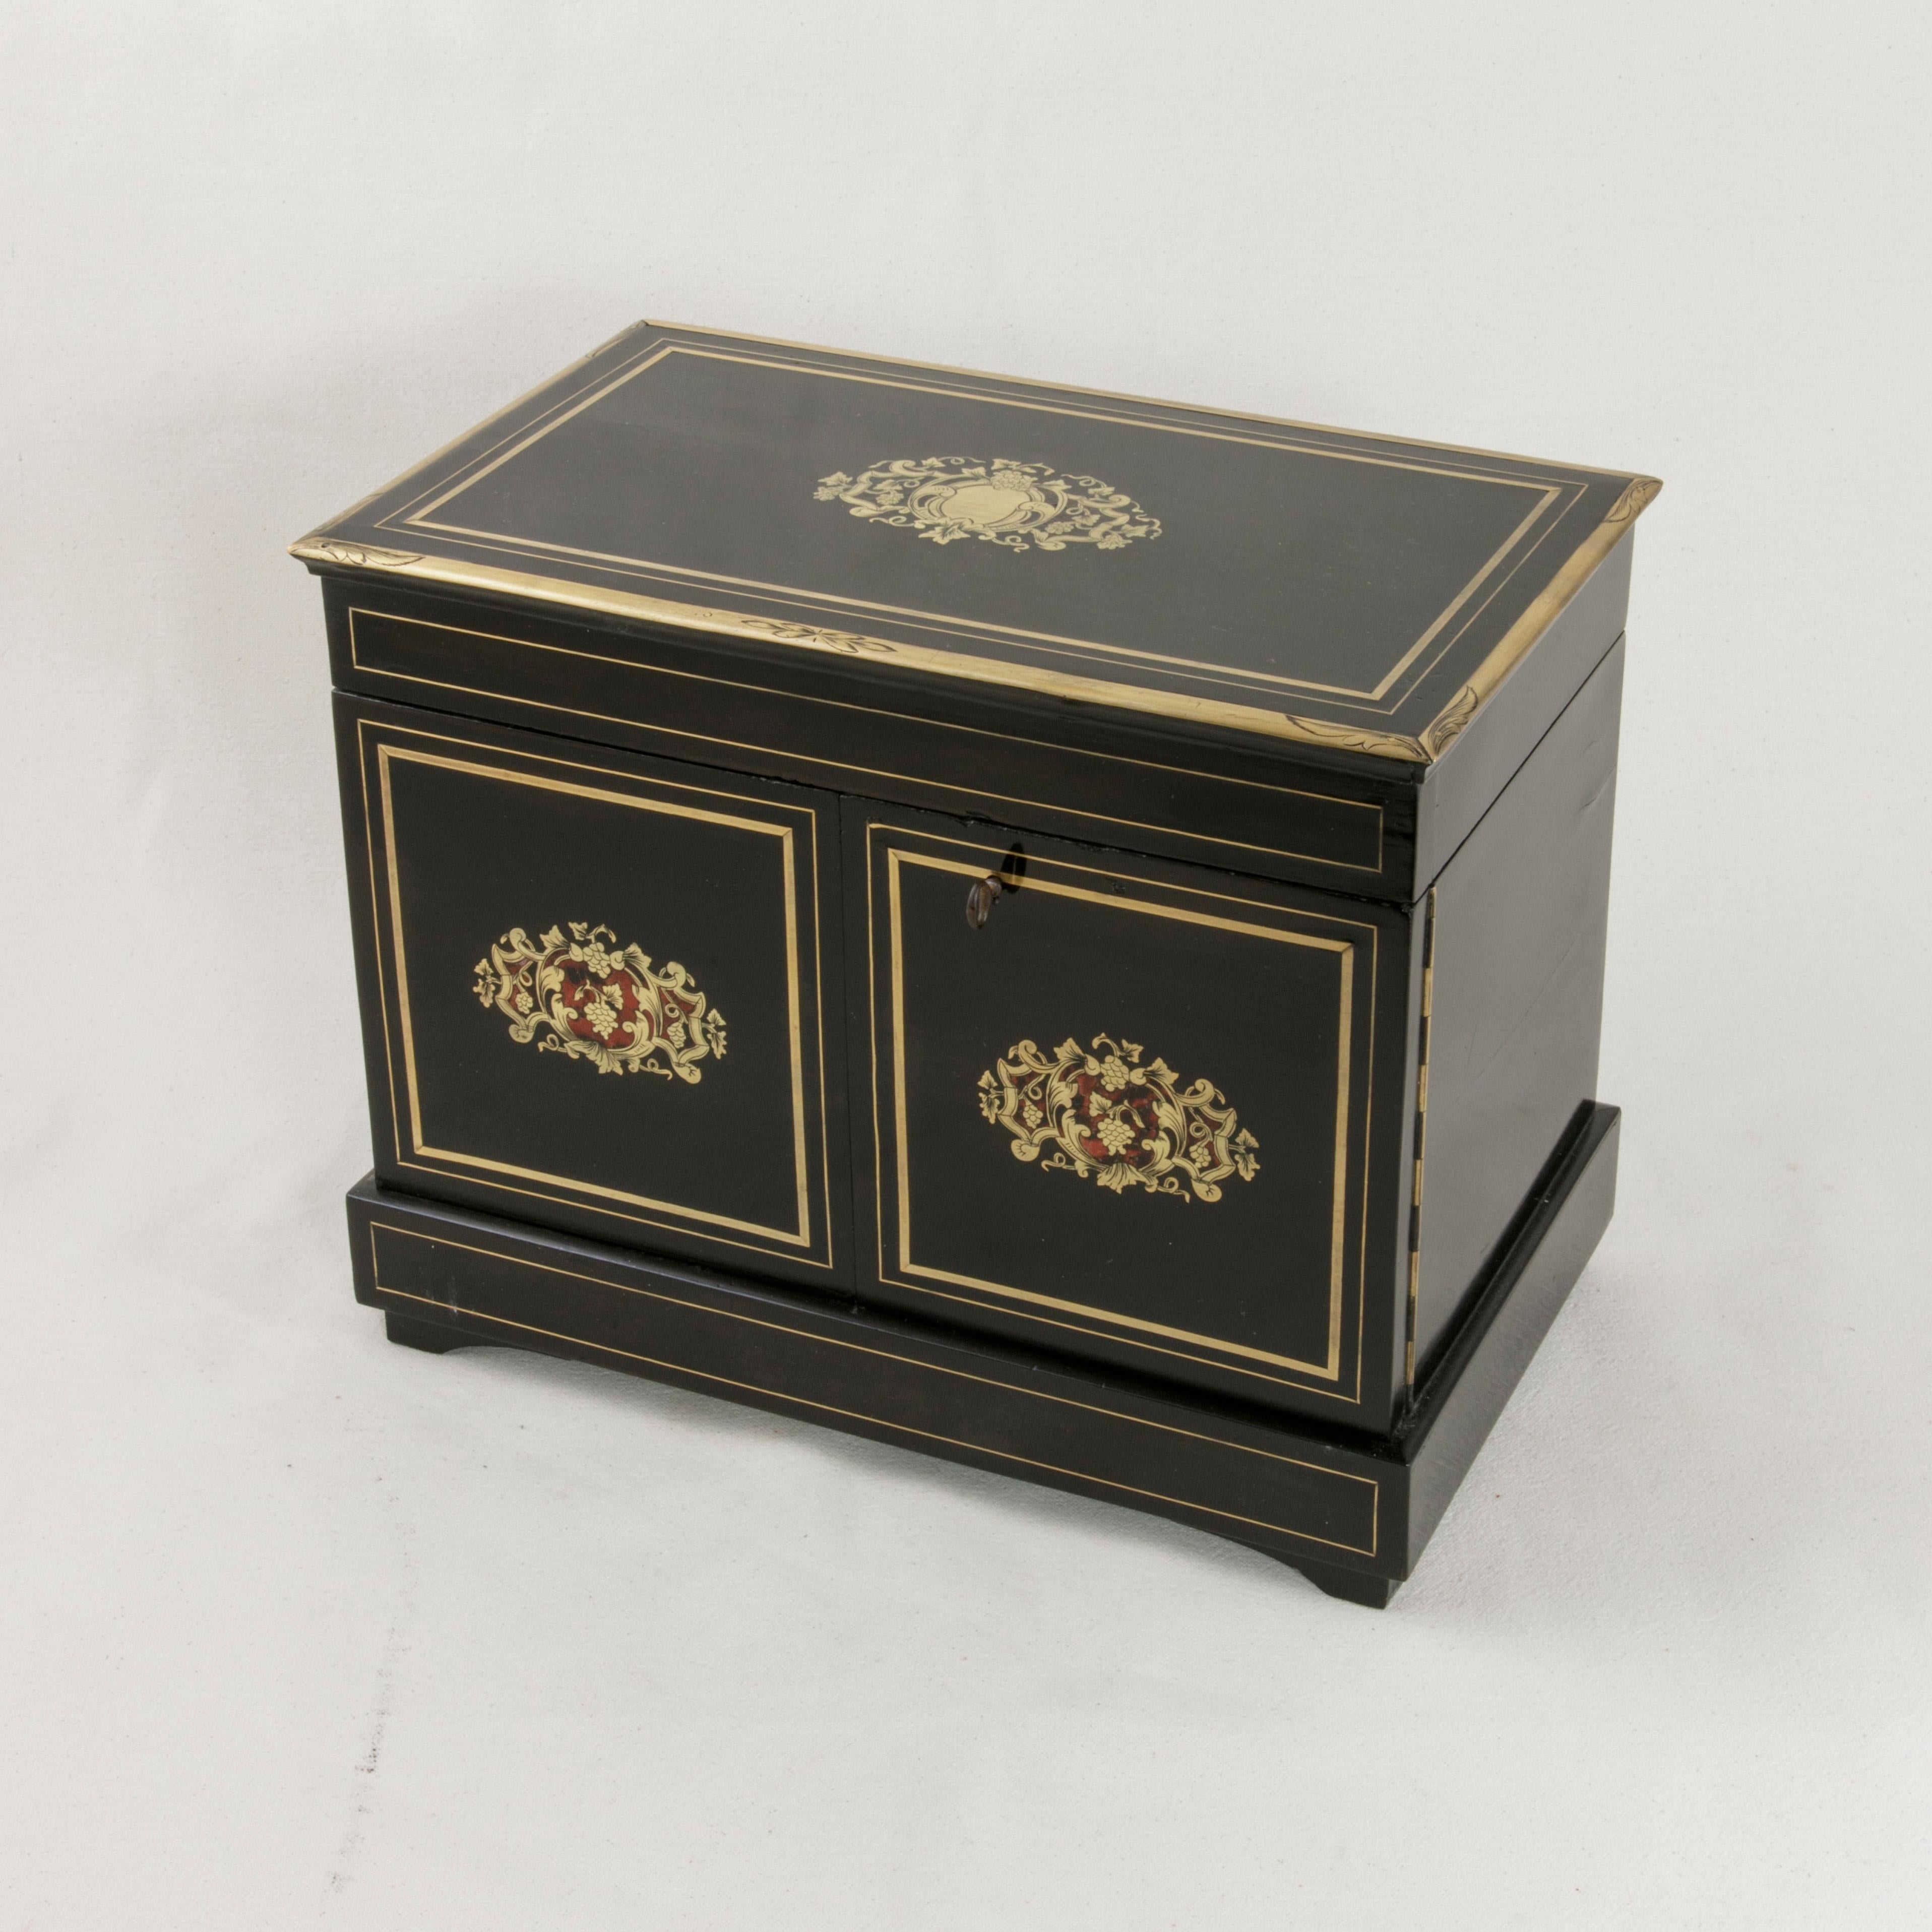 This mid-19th century French Napoleon III period black lacquer cave a liqueur (liqueur caddy) or tantalus features bronze and tortoiseshell inlaid cartouches on the lid and doors. Additional bronze banding trims the top and front panels of the box.